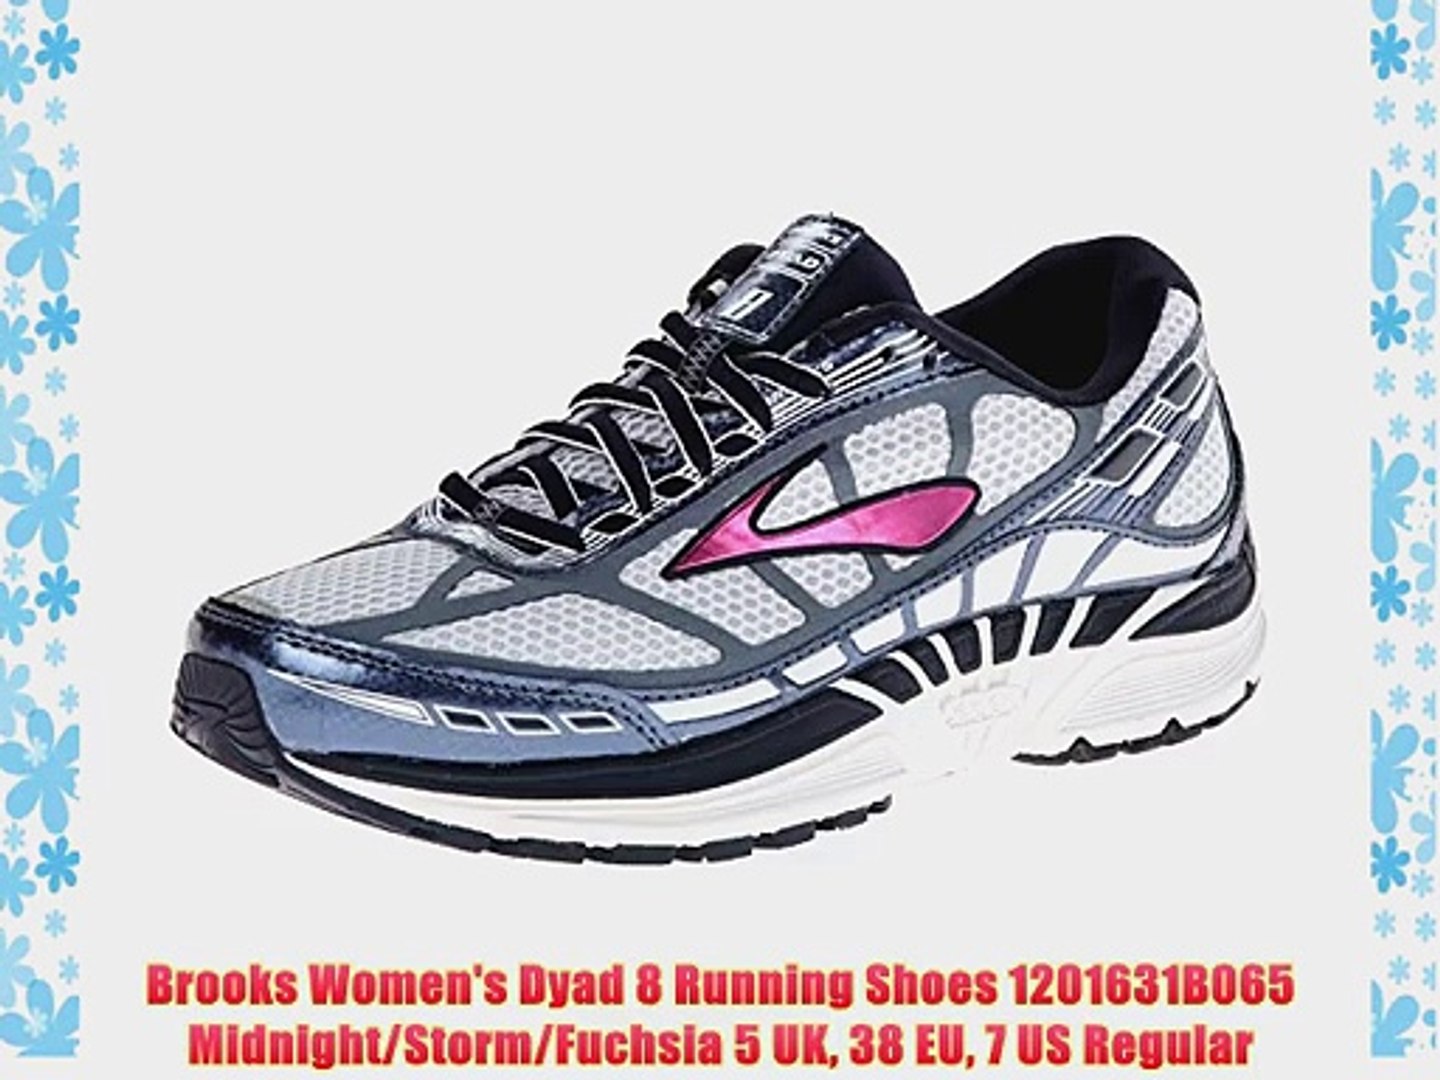 dyad running shoes